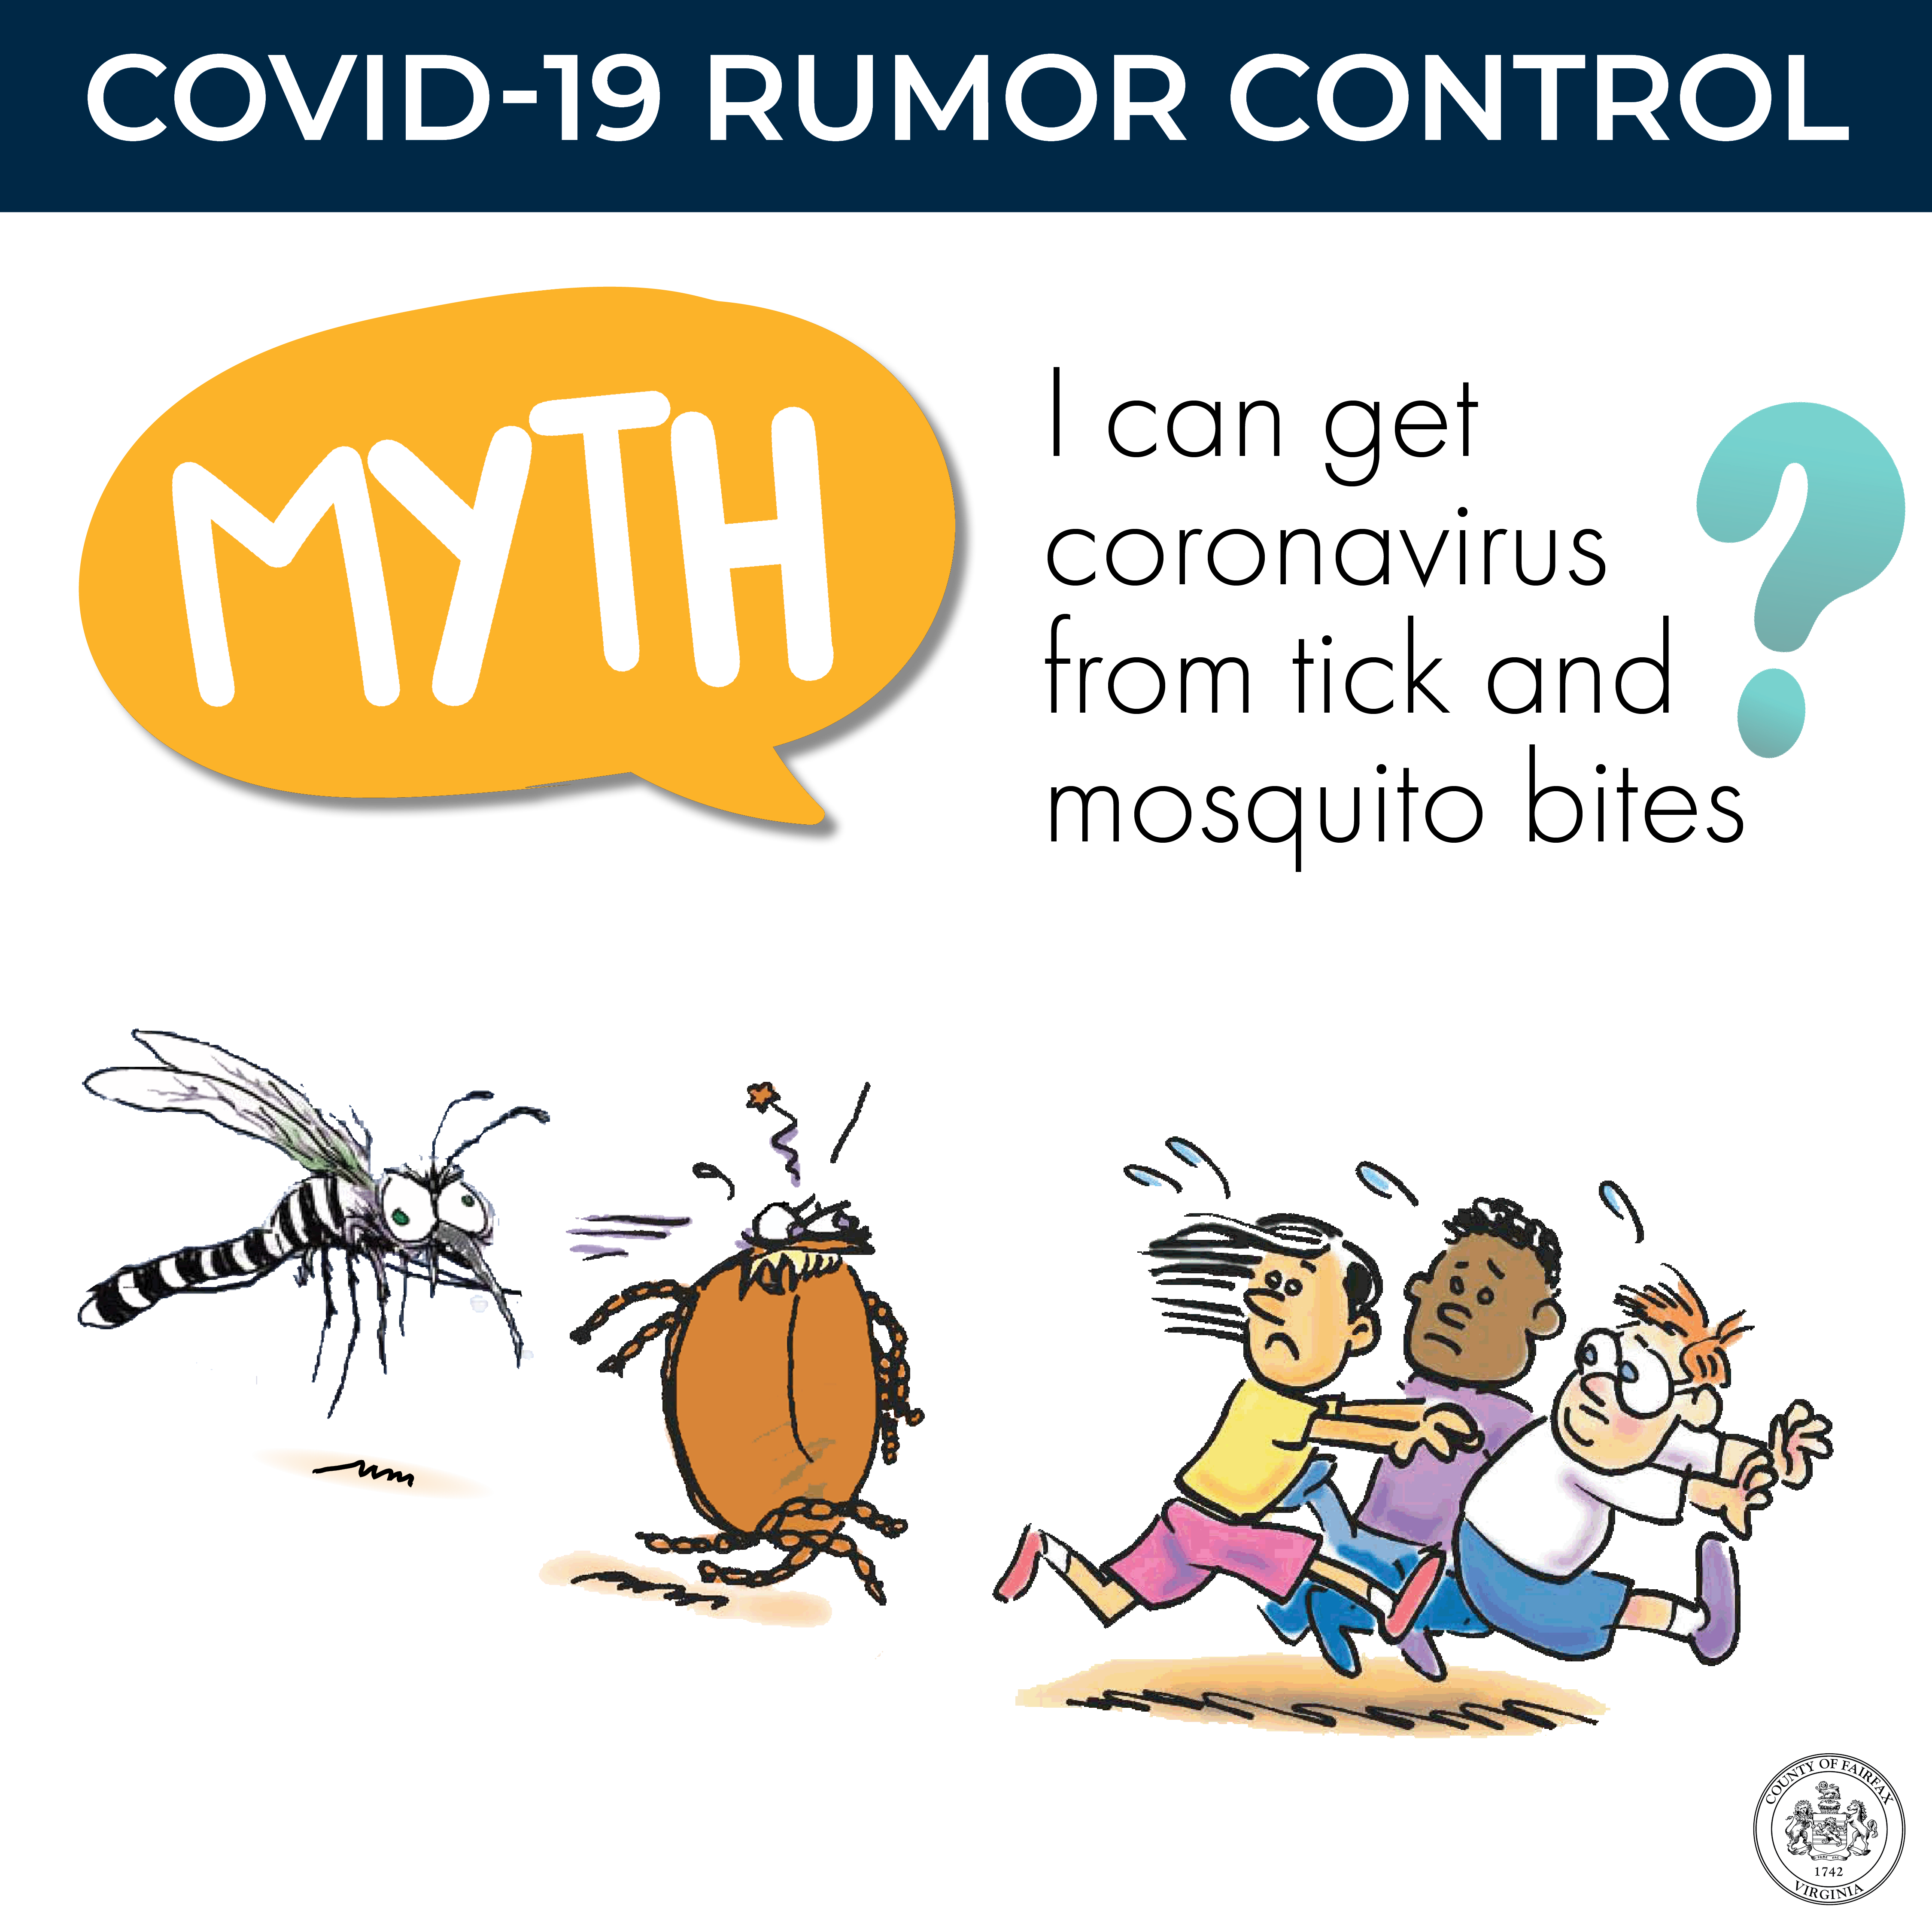 Myth: COVID-19 and mosquitos